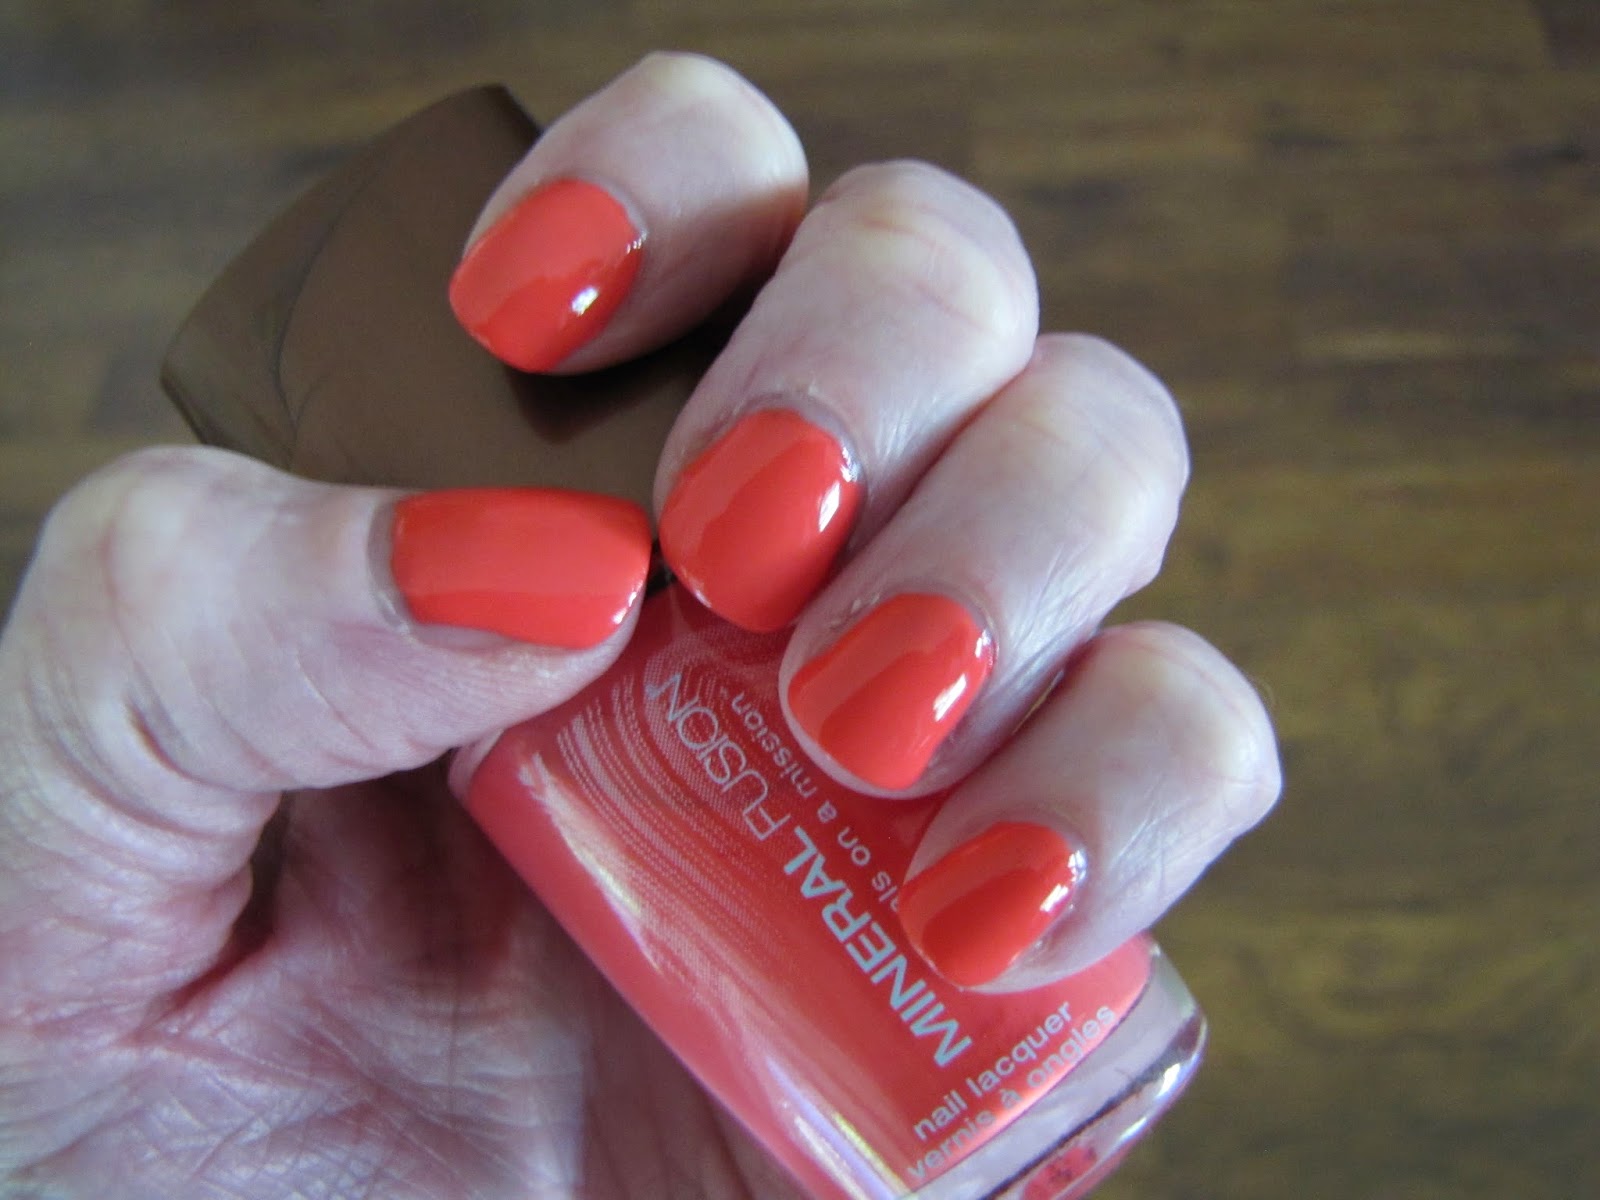 2. Essie Nail Polish in "Coral Reef" - wide 5